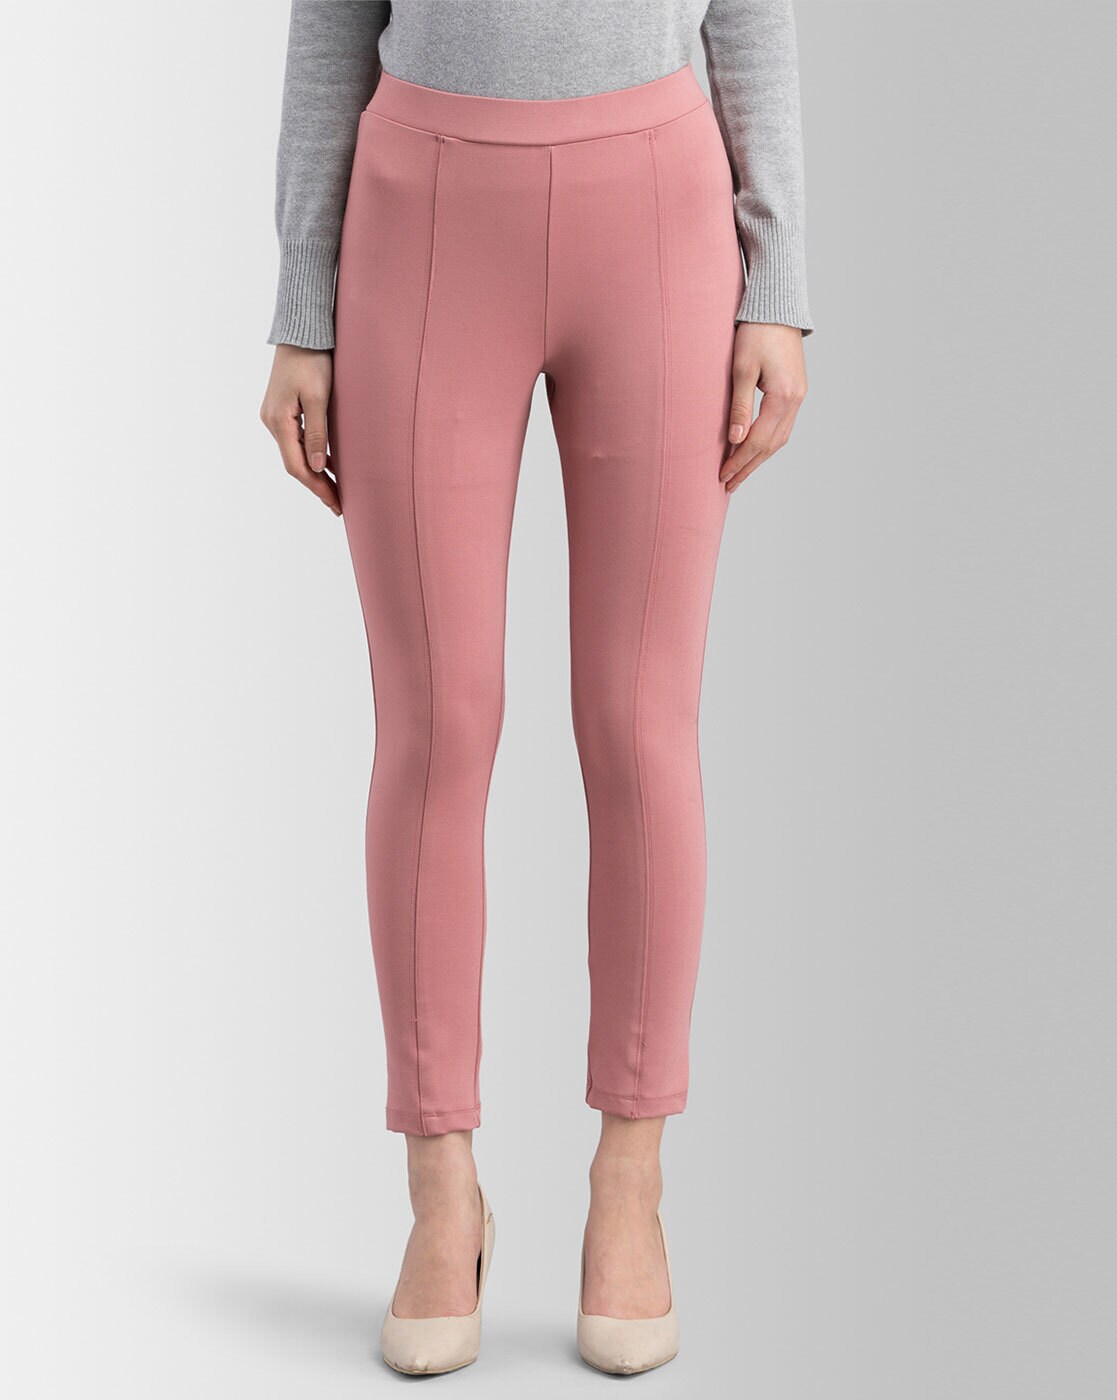 Buy Pink Jeans & Jeggings for Women by LGC Online